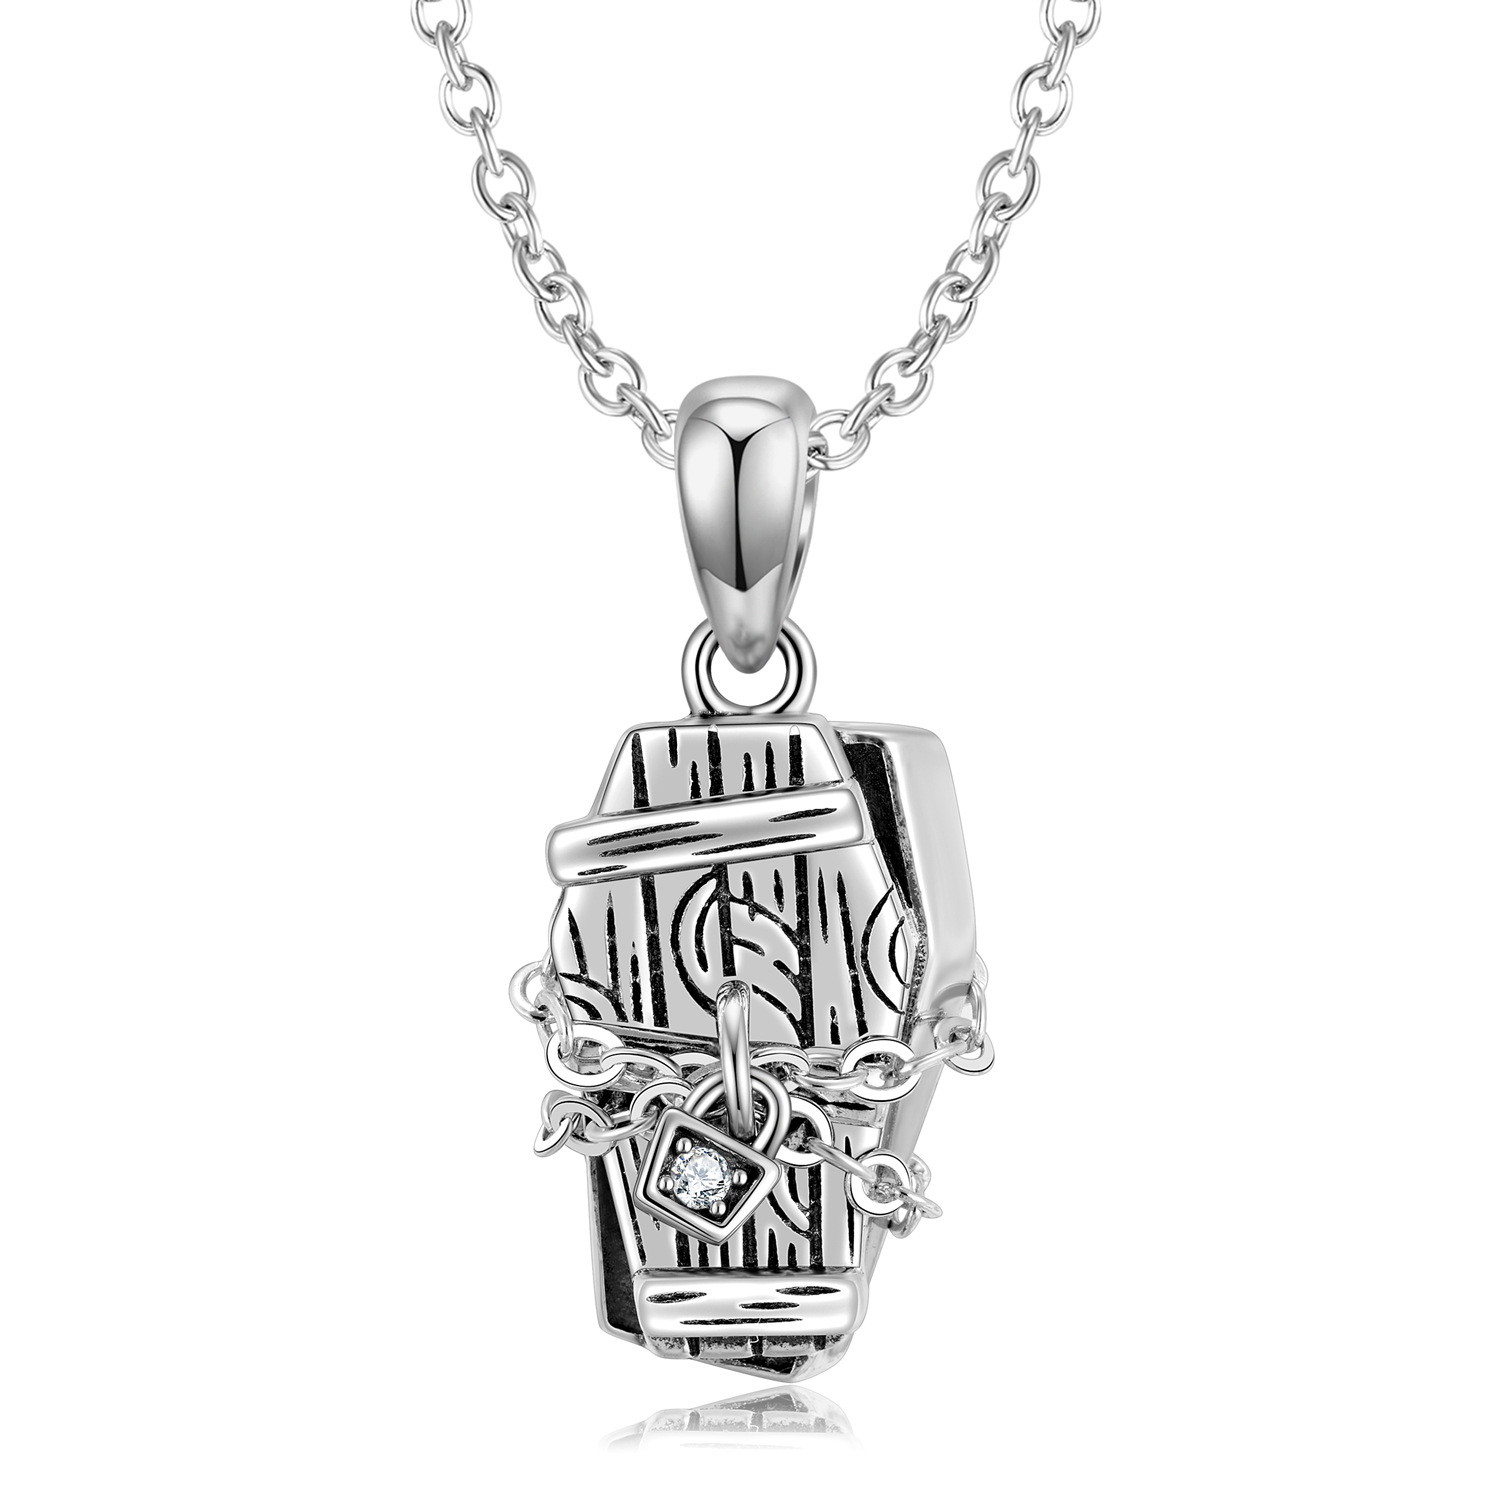 Cz Seal Coffin Chain Sterling Silver Pendant Necklace